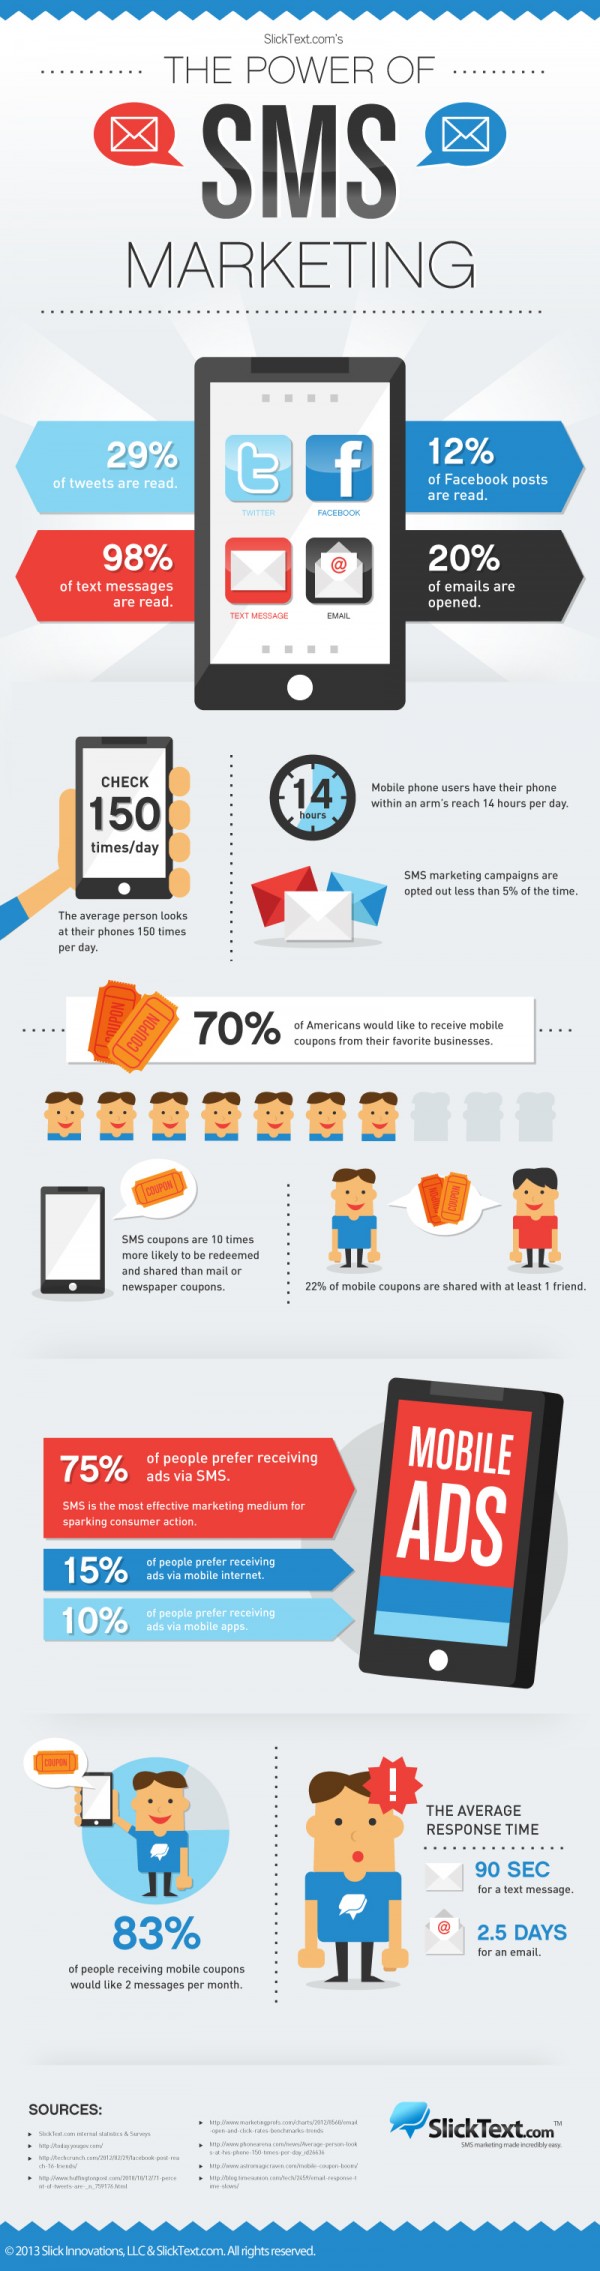 The Power Of SMS Marketing [Infographic] | SlickText